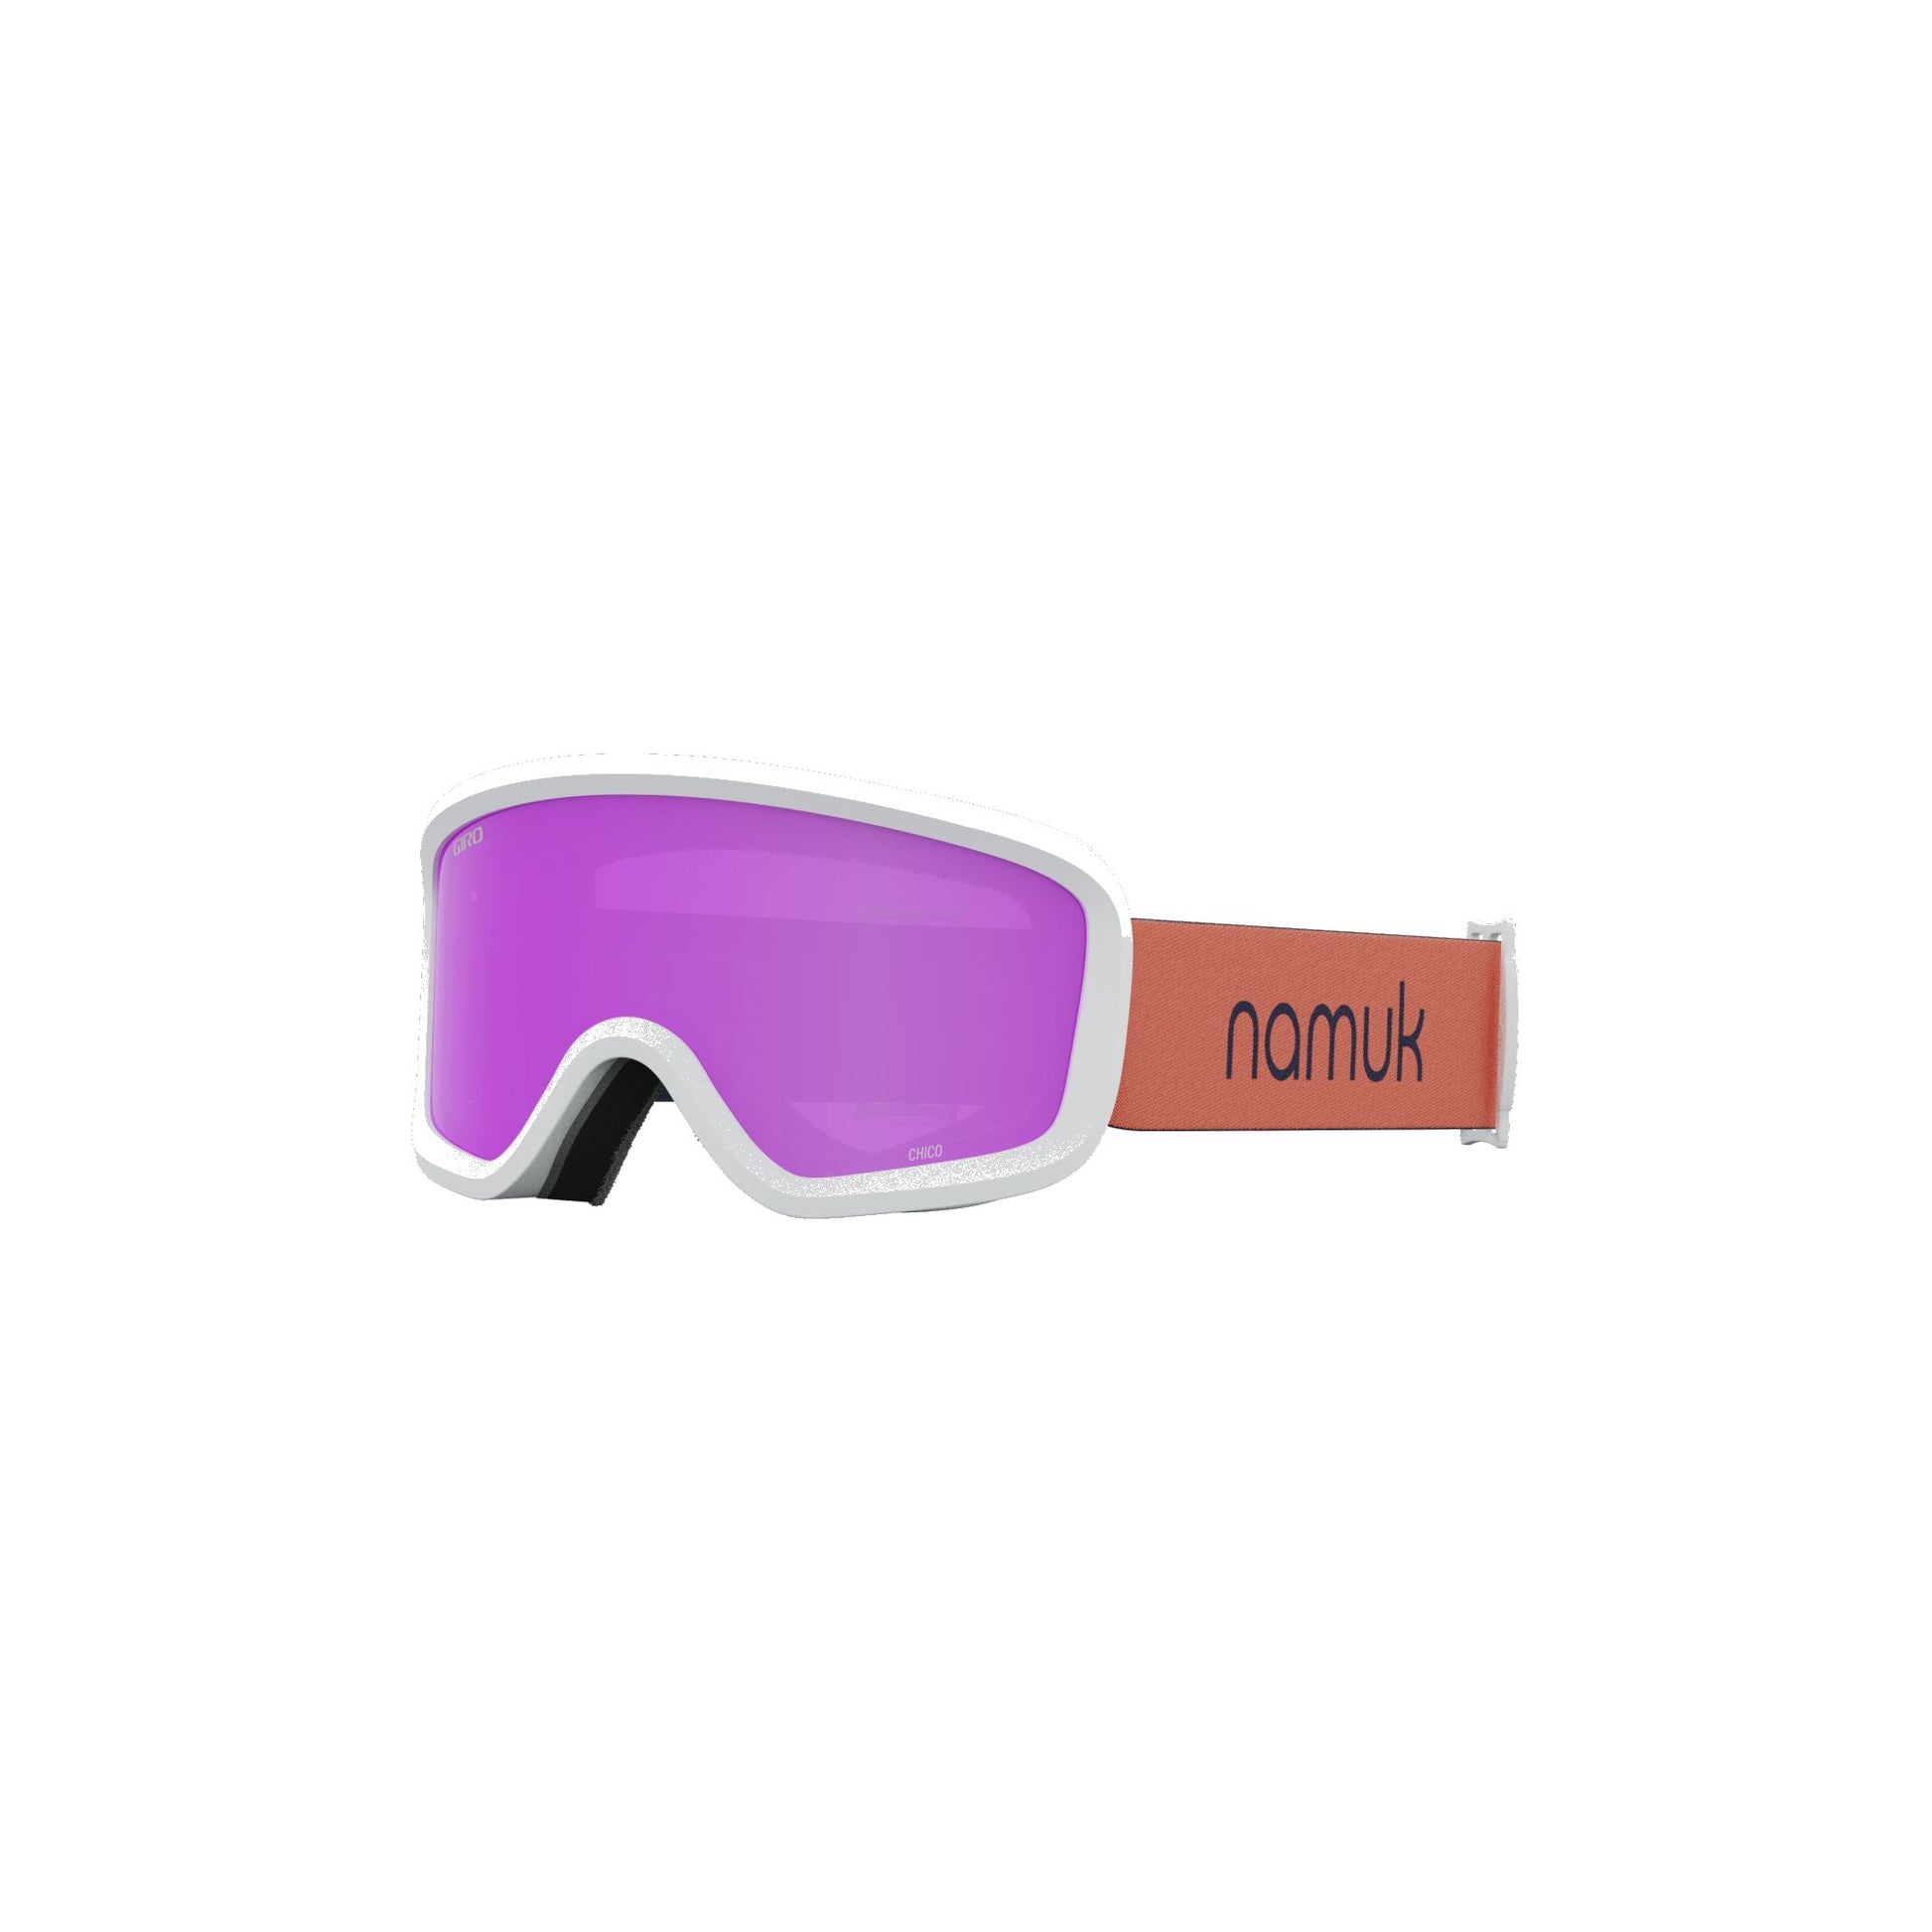 Giro Youth Chico 2.0 Snow Goggles Namuk Coral/True Navy/Amber Pink Snow Goggles